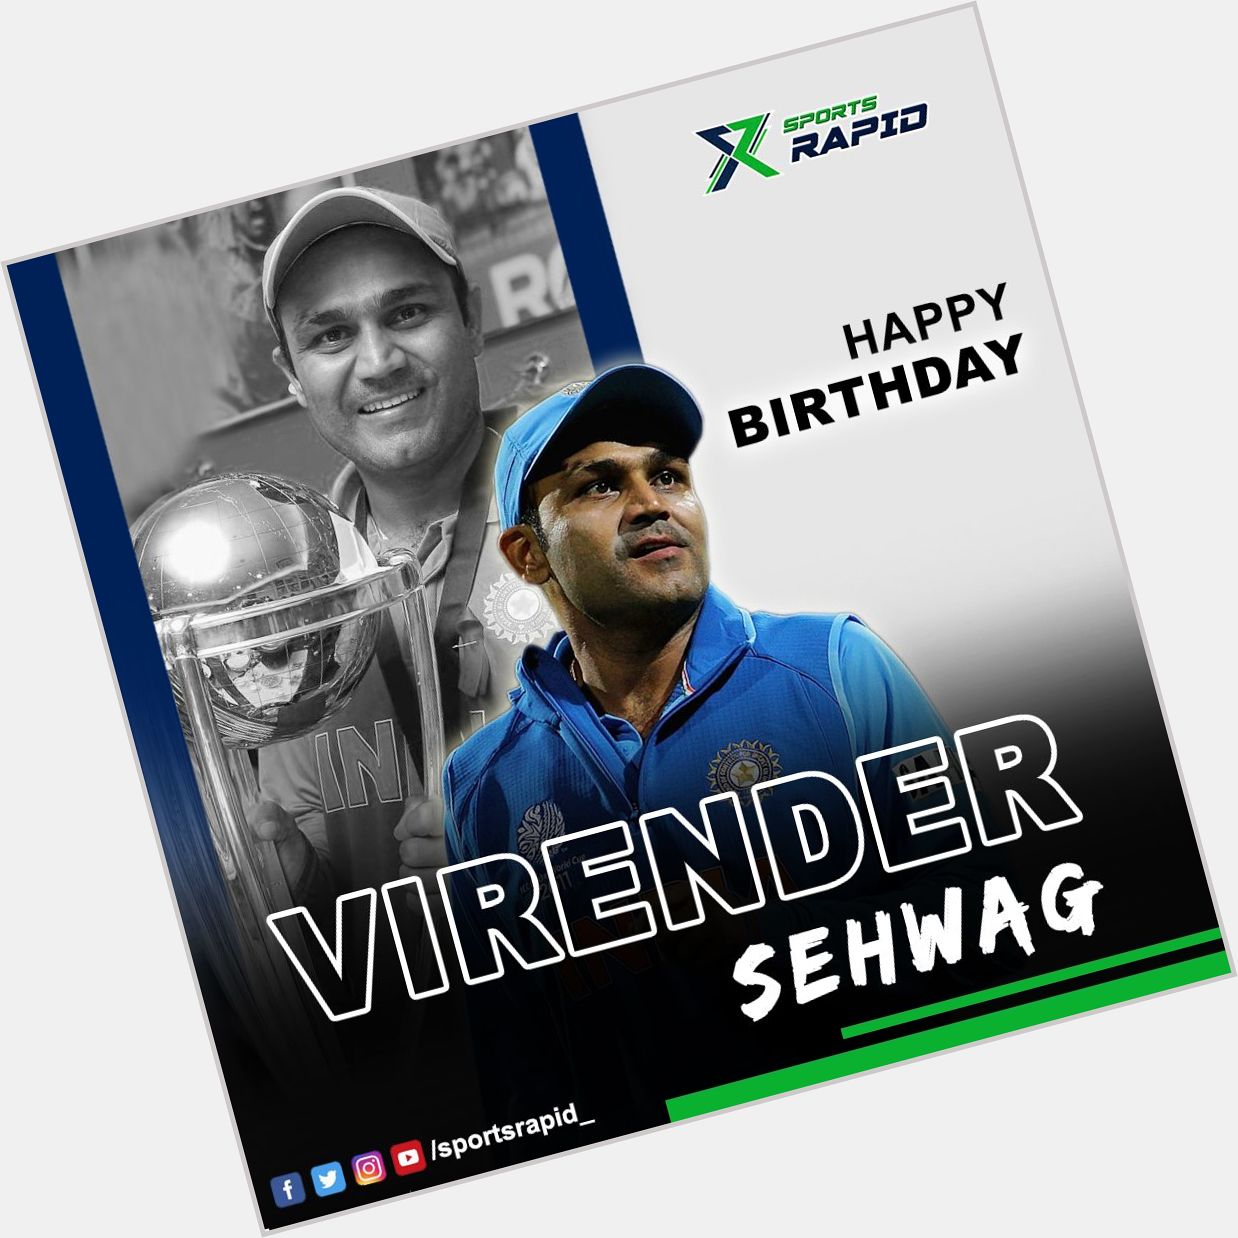 Happy birthday to one of the cricket legends,Virender Sehwag.    